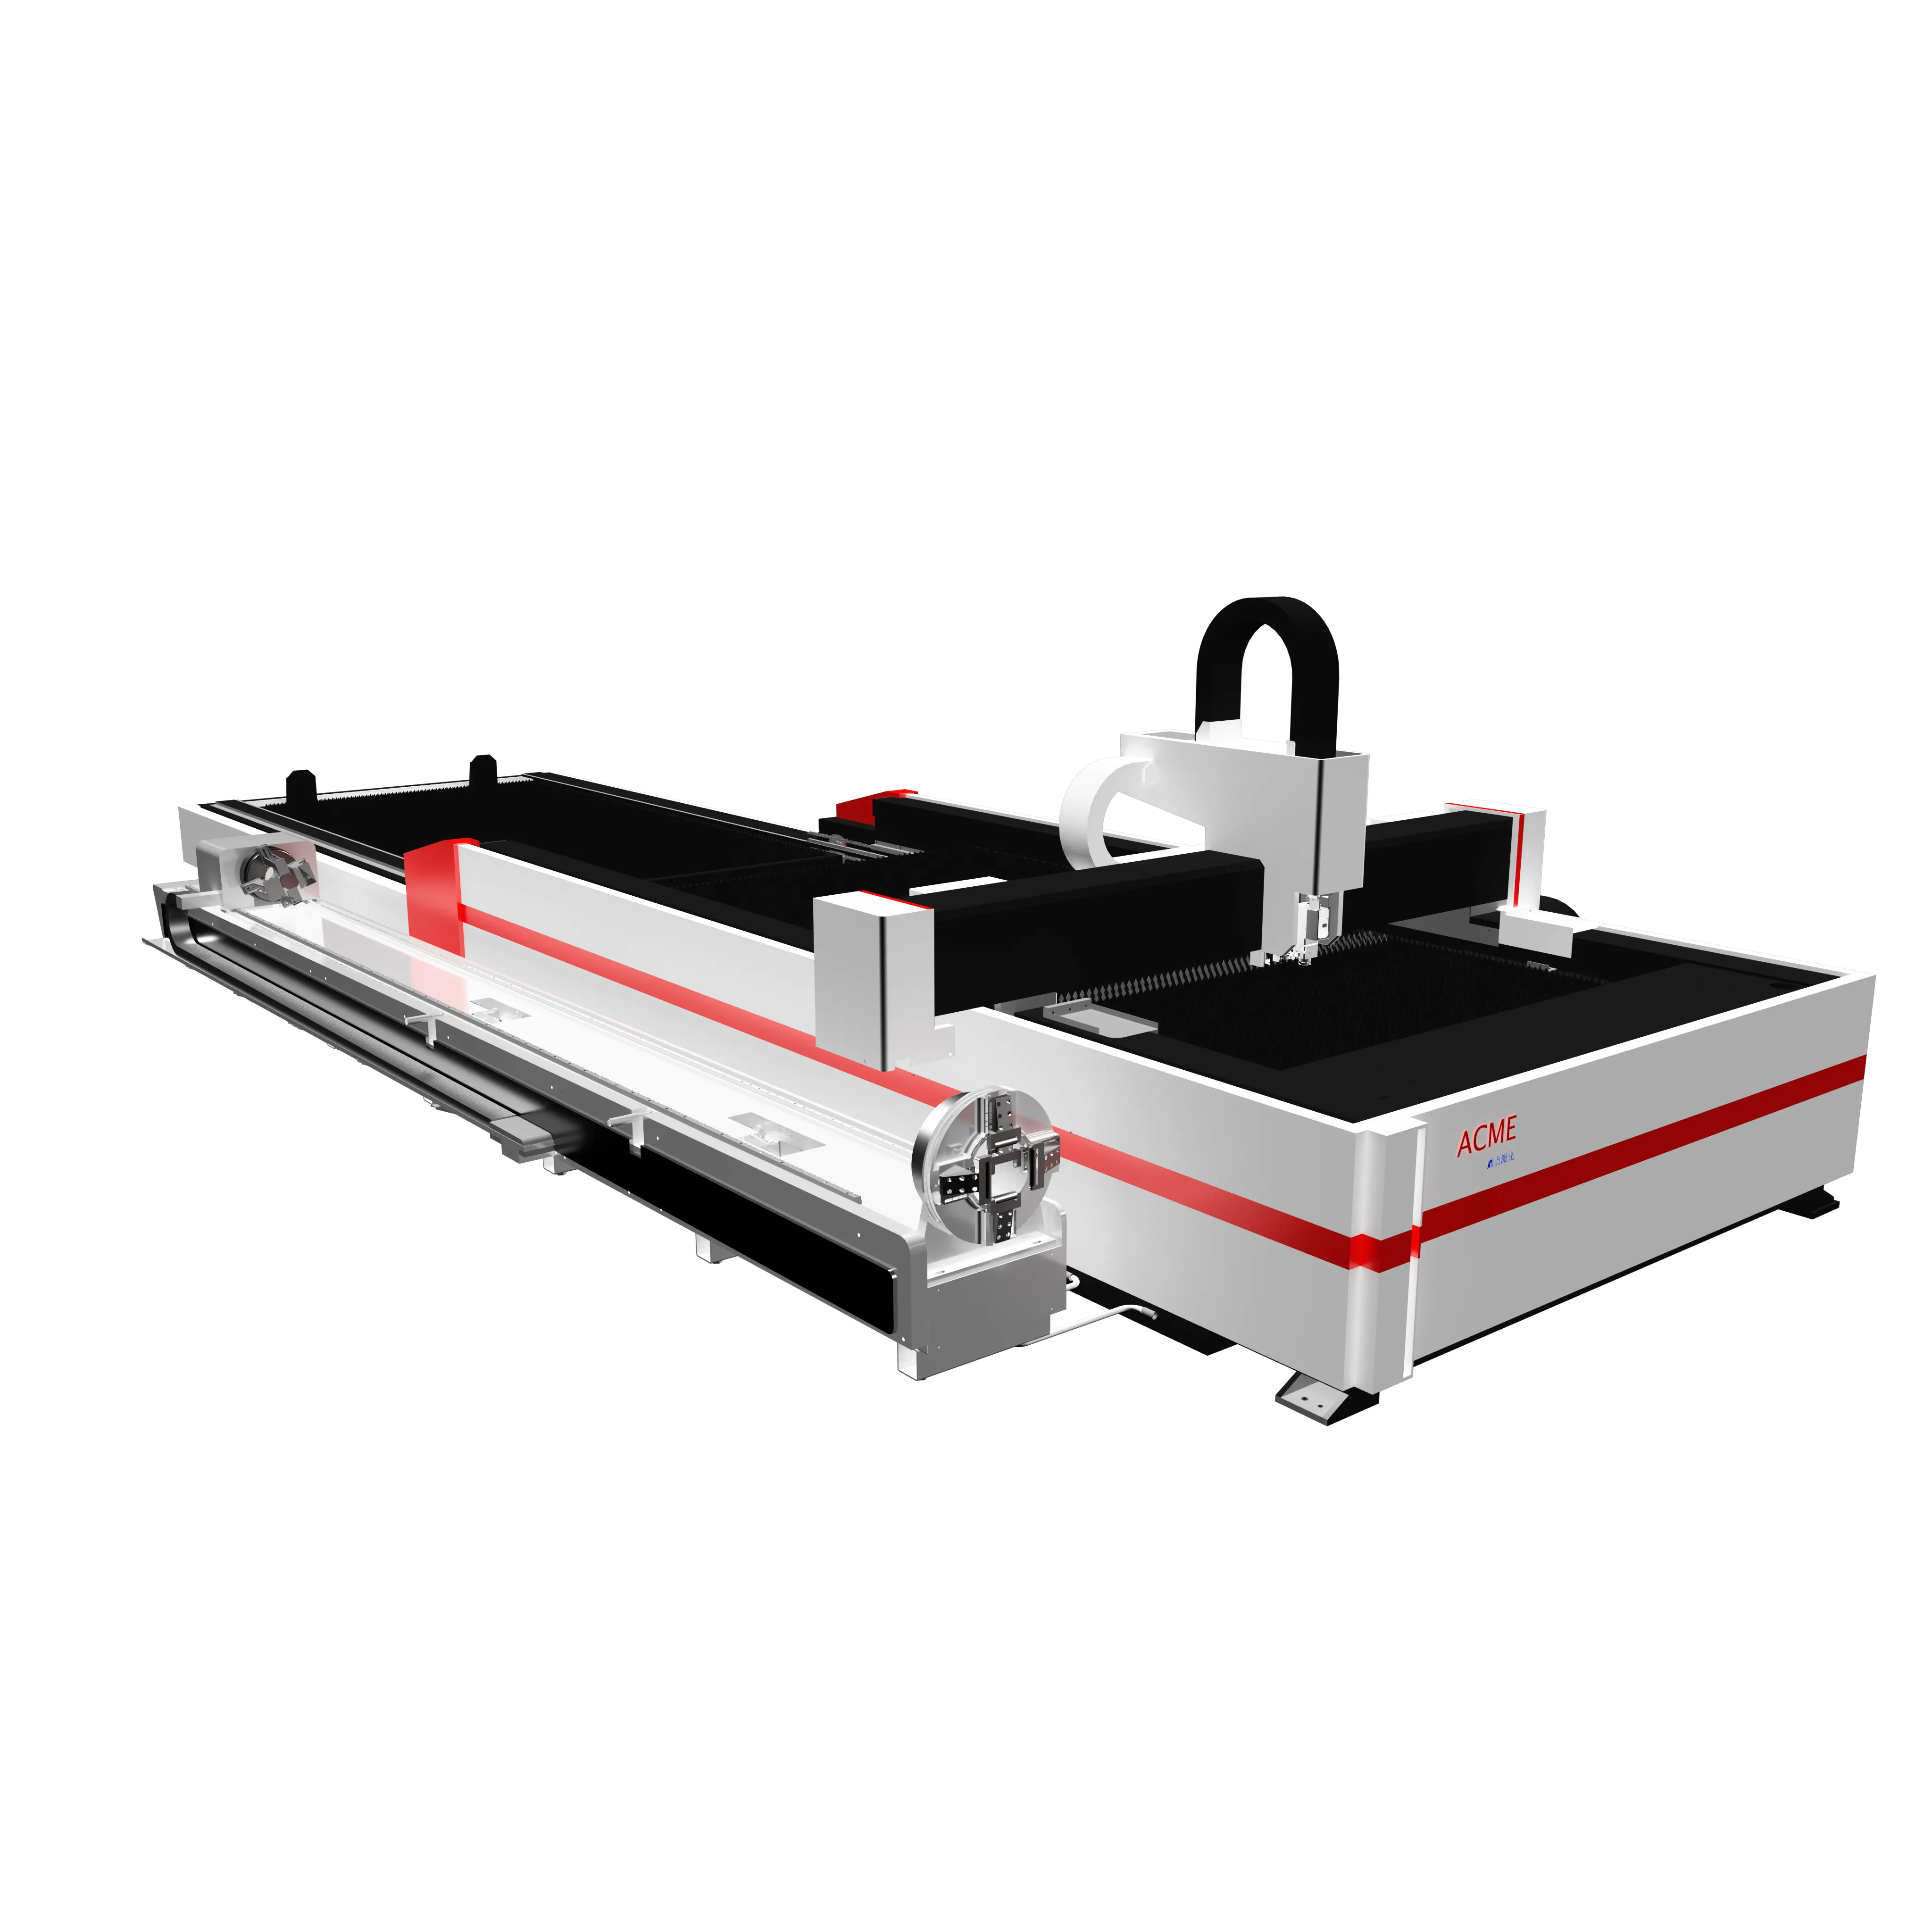 Discount Plate And Pipes Fiber Laser Cutting Machine preços